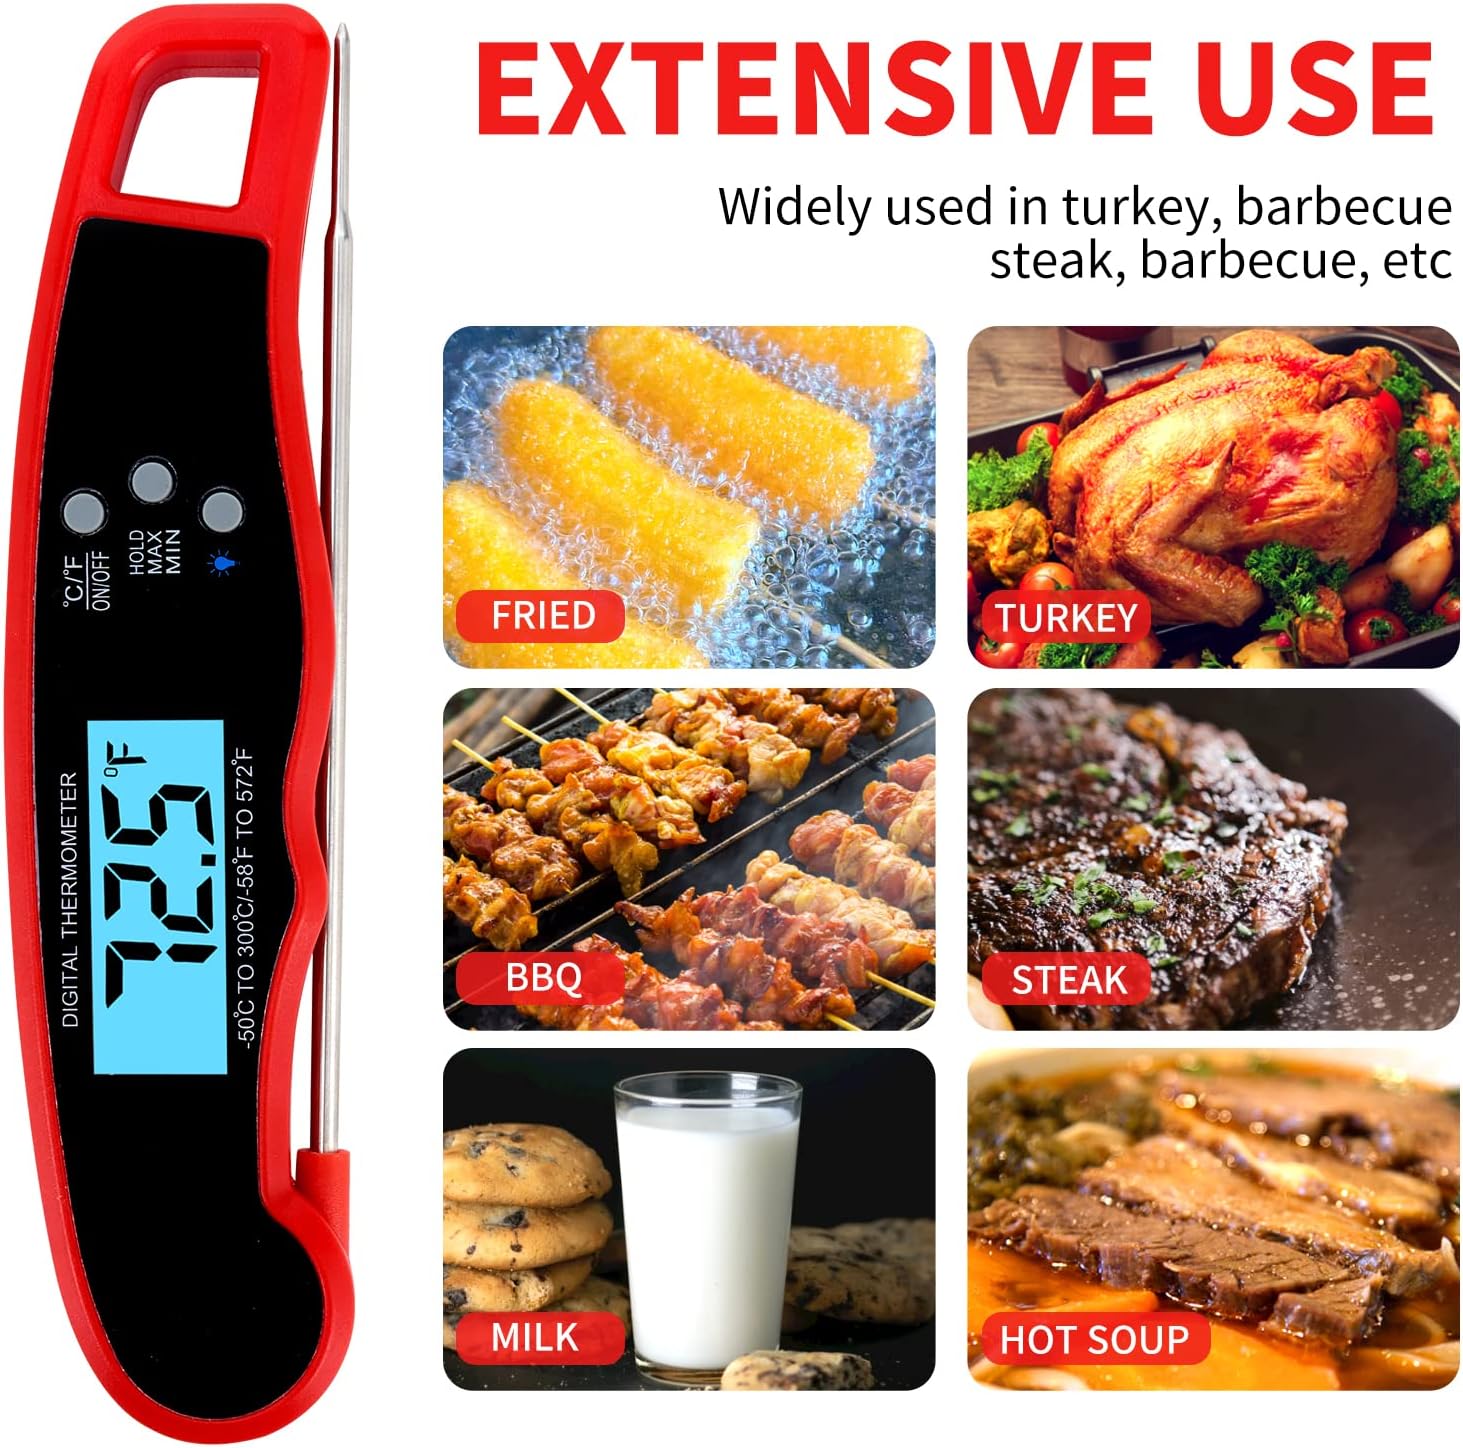 YLMIJFE Meat Thermometer,Meat Thermometer Digital,Waterproof and Backlight Instant Read Meat Thermometer for Grill and Cooking.Digital Food Probe for Kitchen, Outdoor Grilling and BBQ!